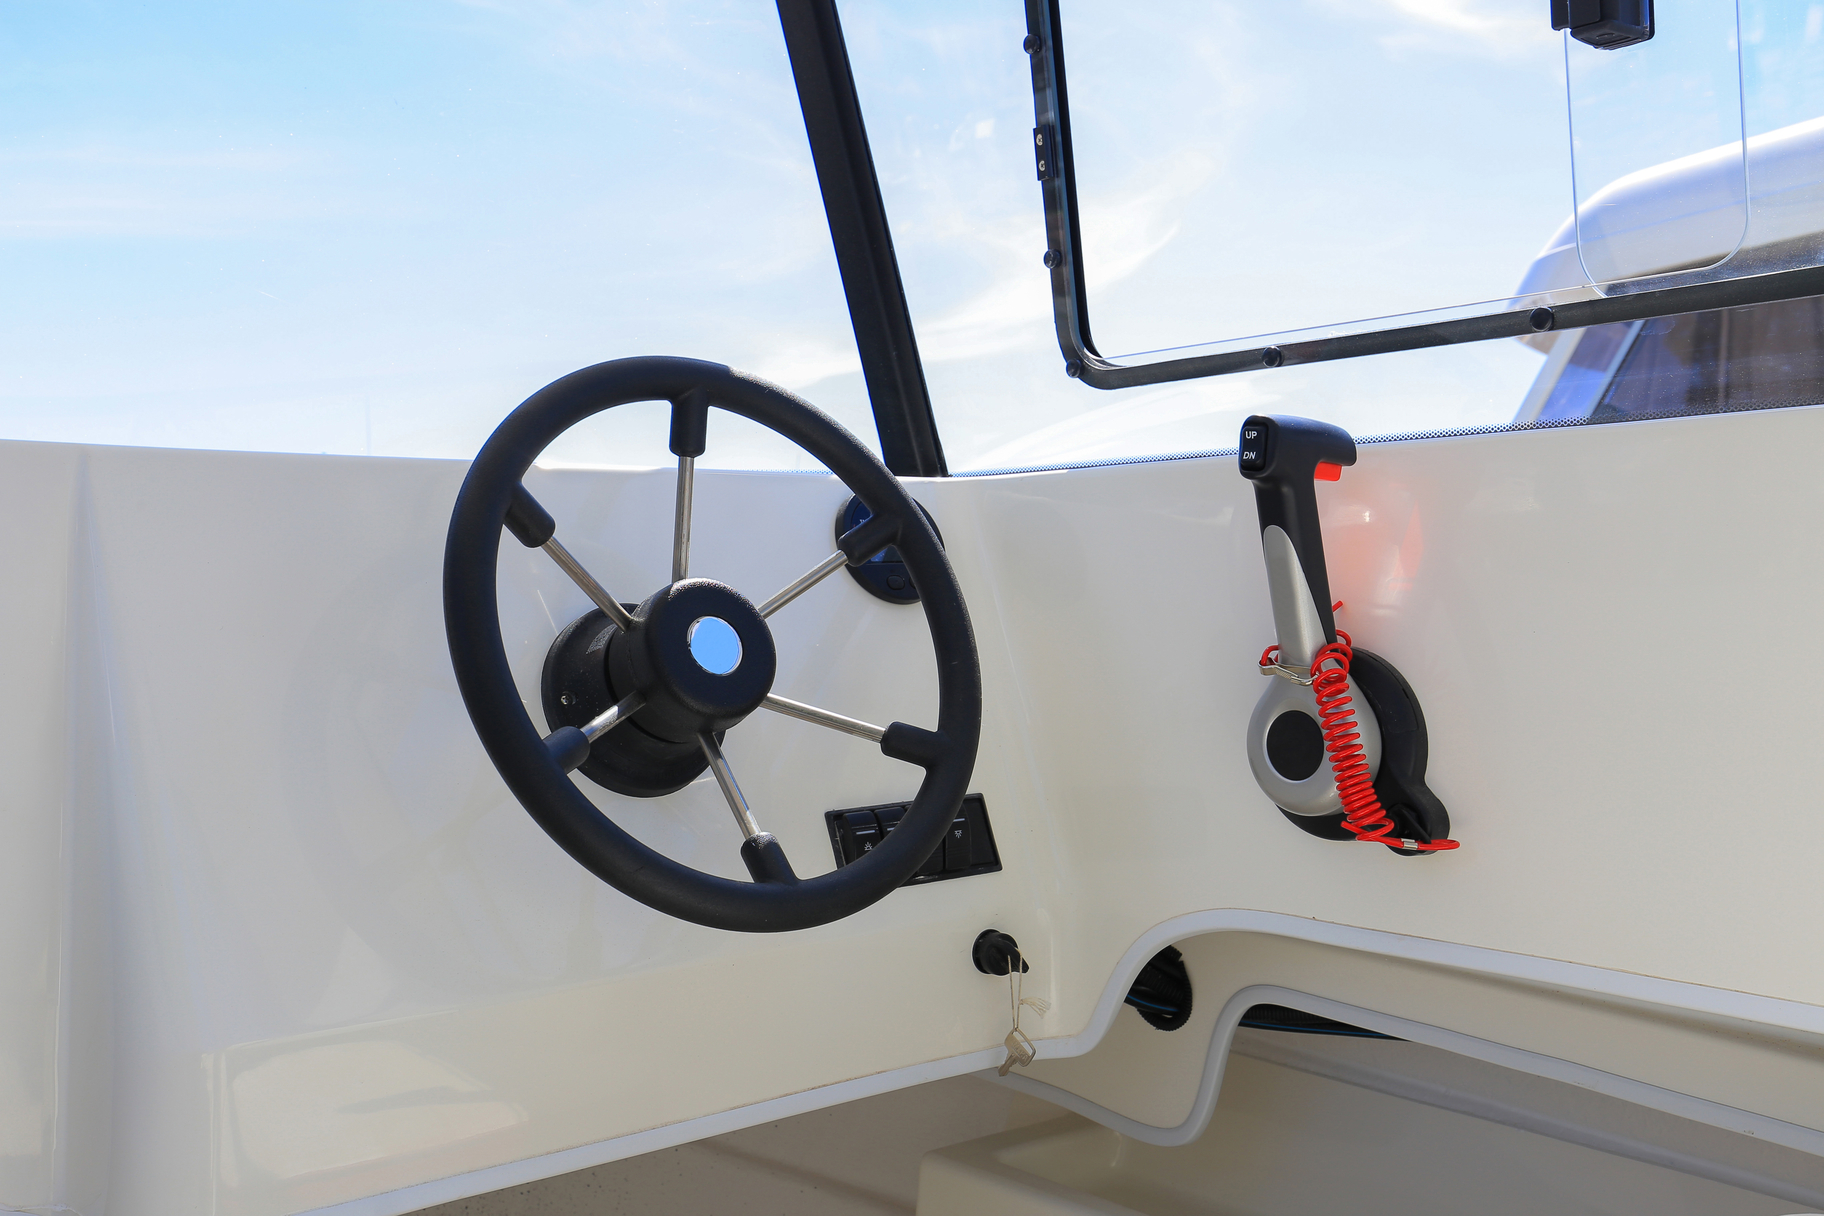 Lanyard Engine Shut-off Boating Law Changed For Spring 2021